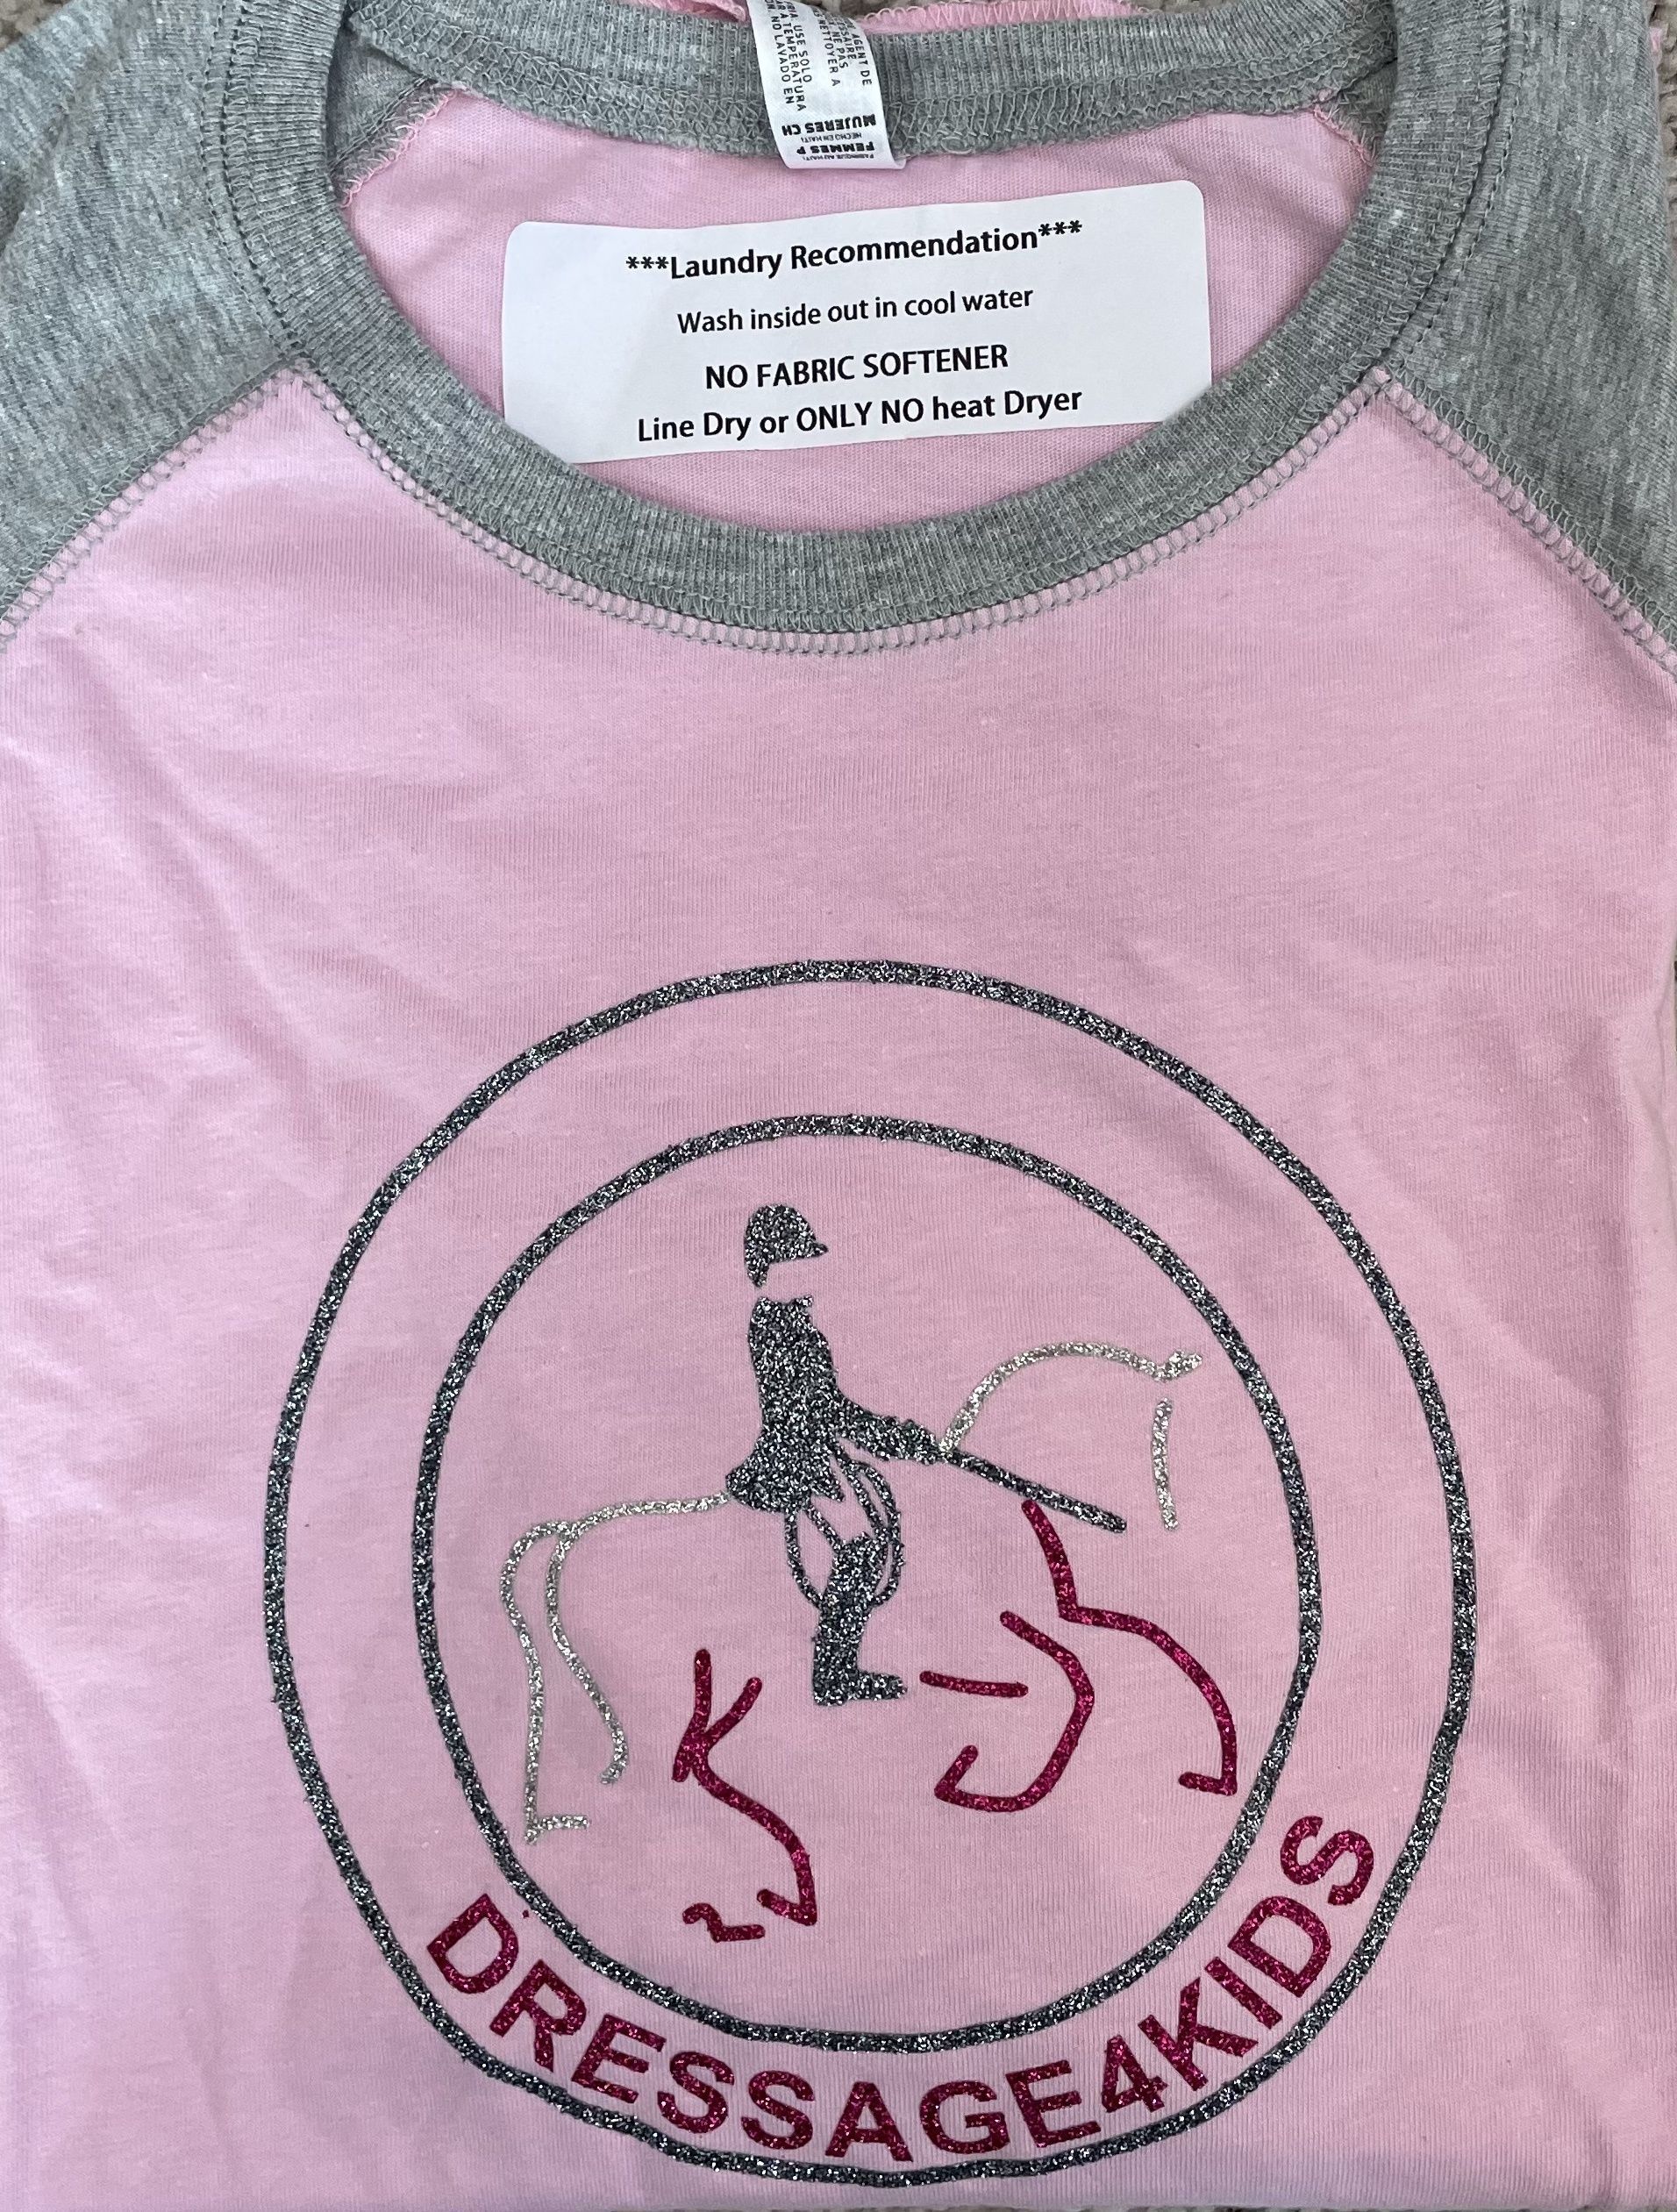 D4K Sparkle Baseball T-shirt (Pink) - $12 - Youth M, Youth L, Youth XL, Ladies S - Click for Details